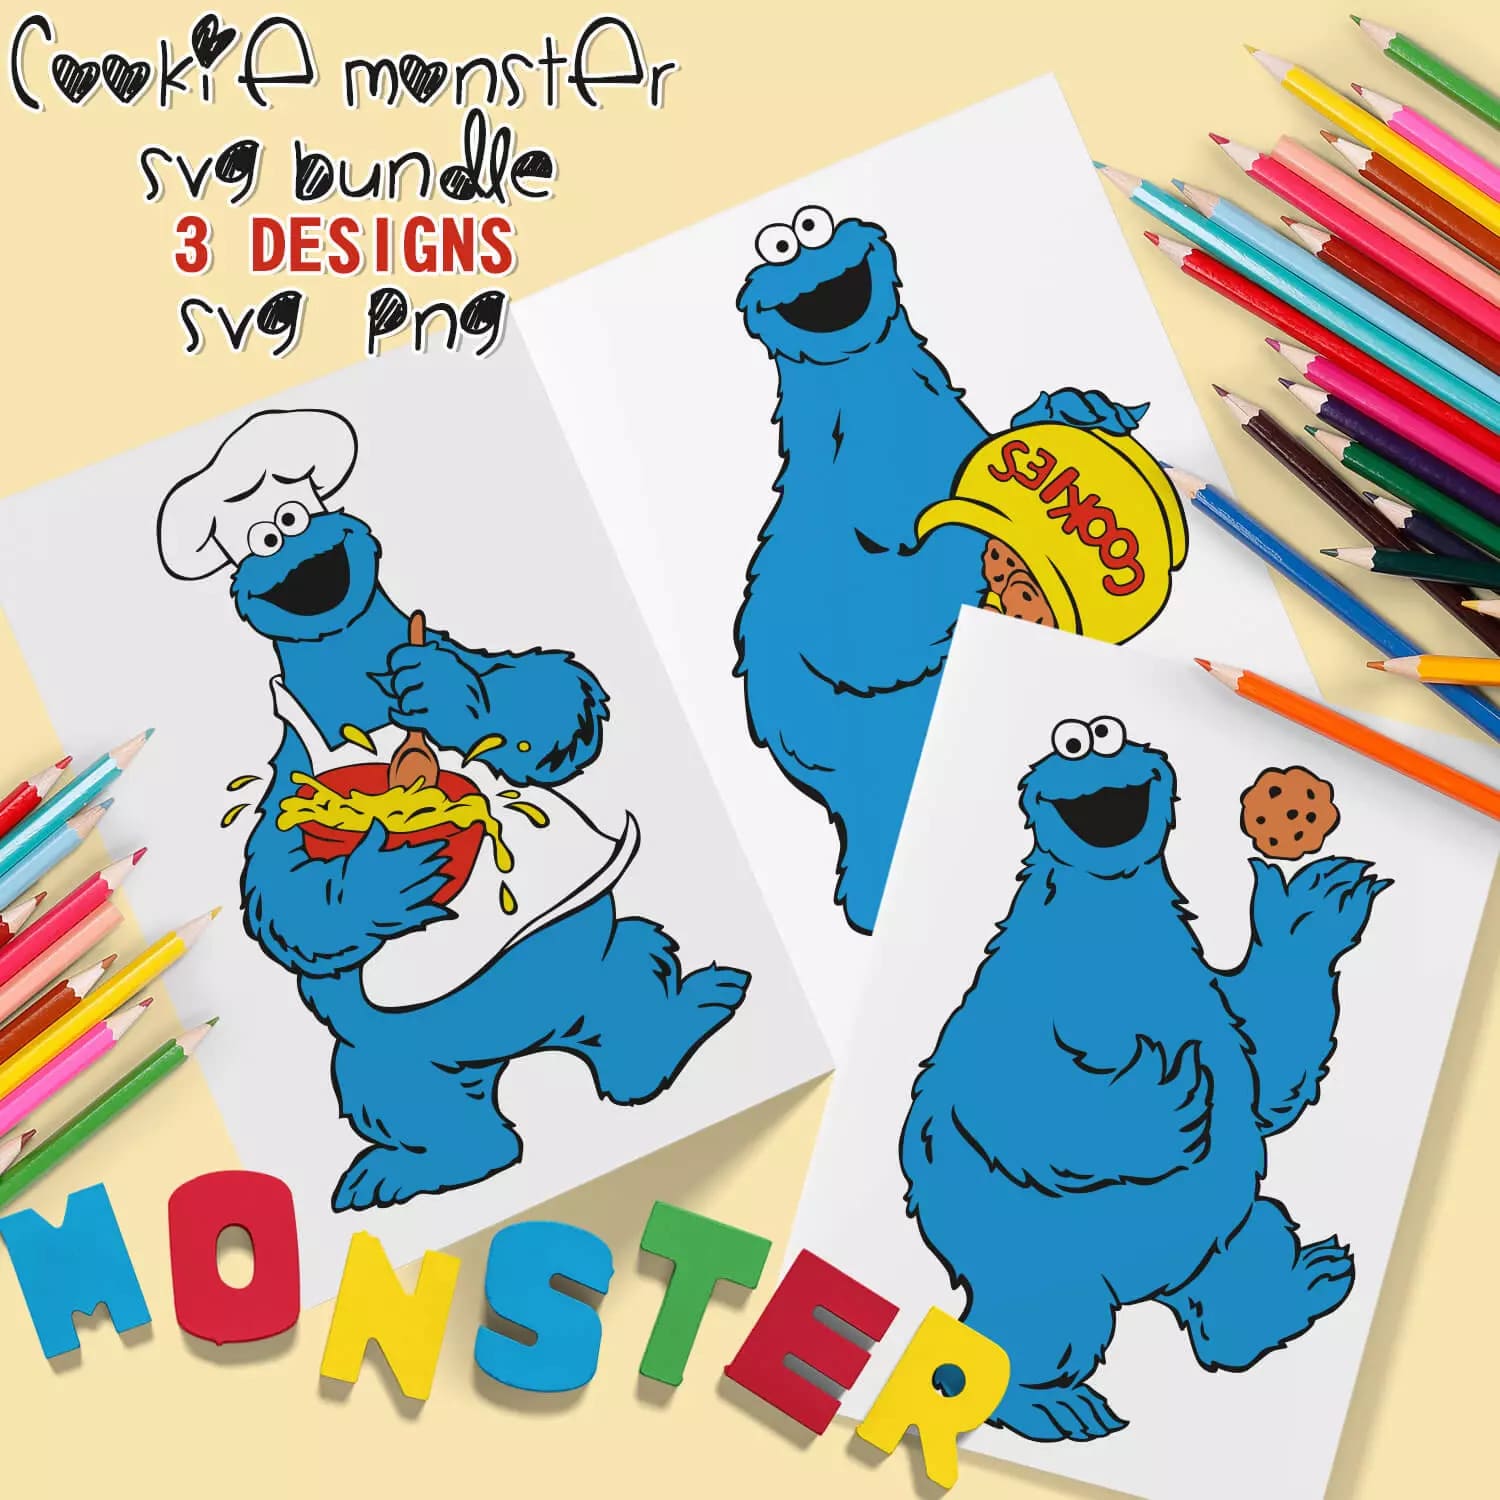 Cookie Monster SVG Preview 1.